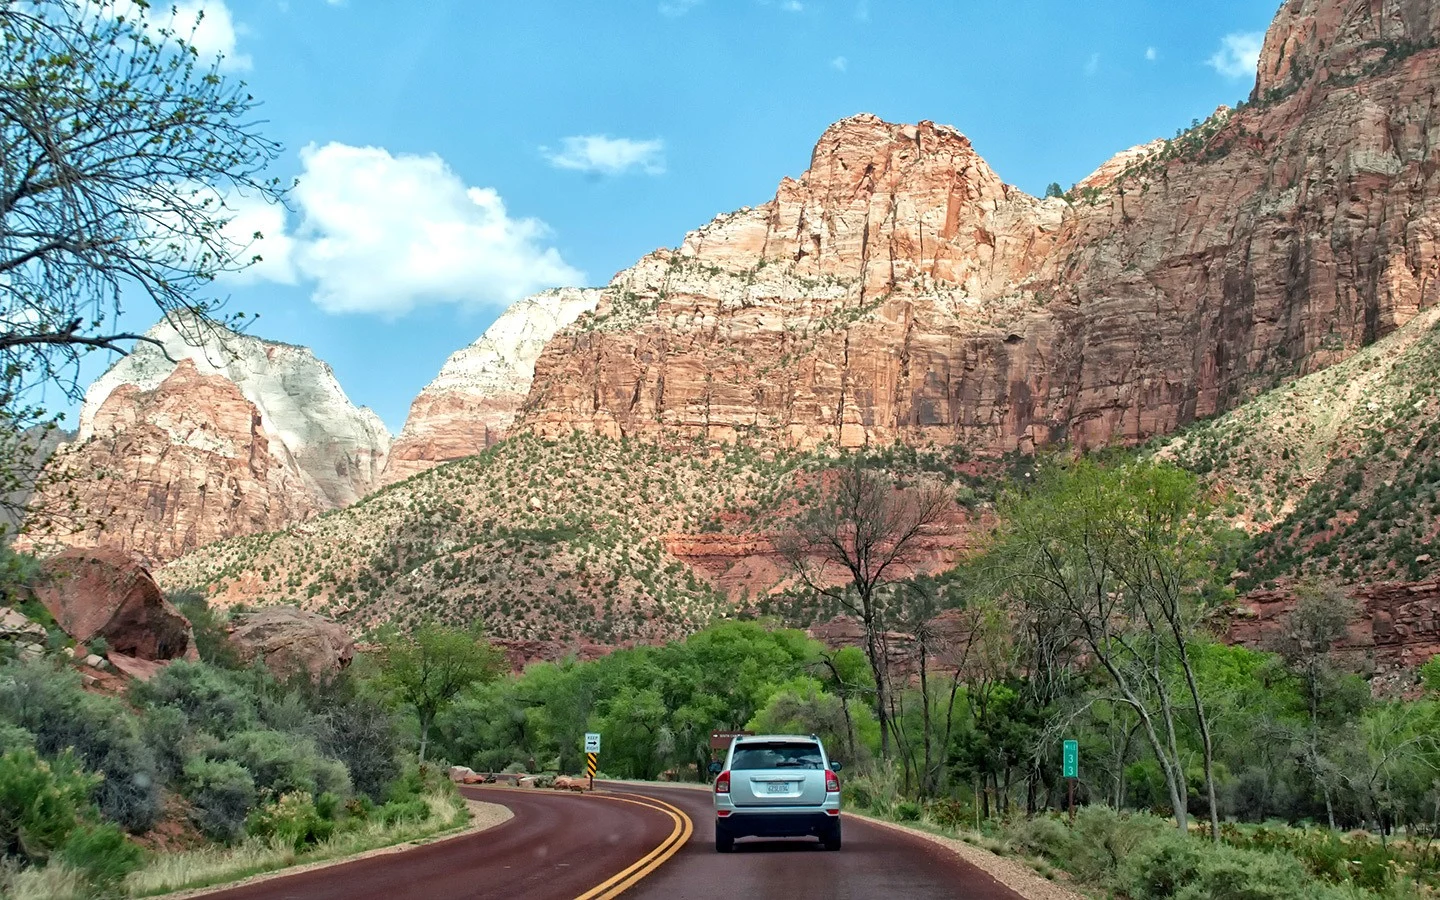 The Zion–Mount Carmel Highway scenic drive in the southwest USA